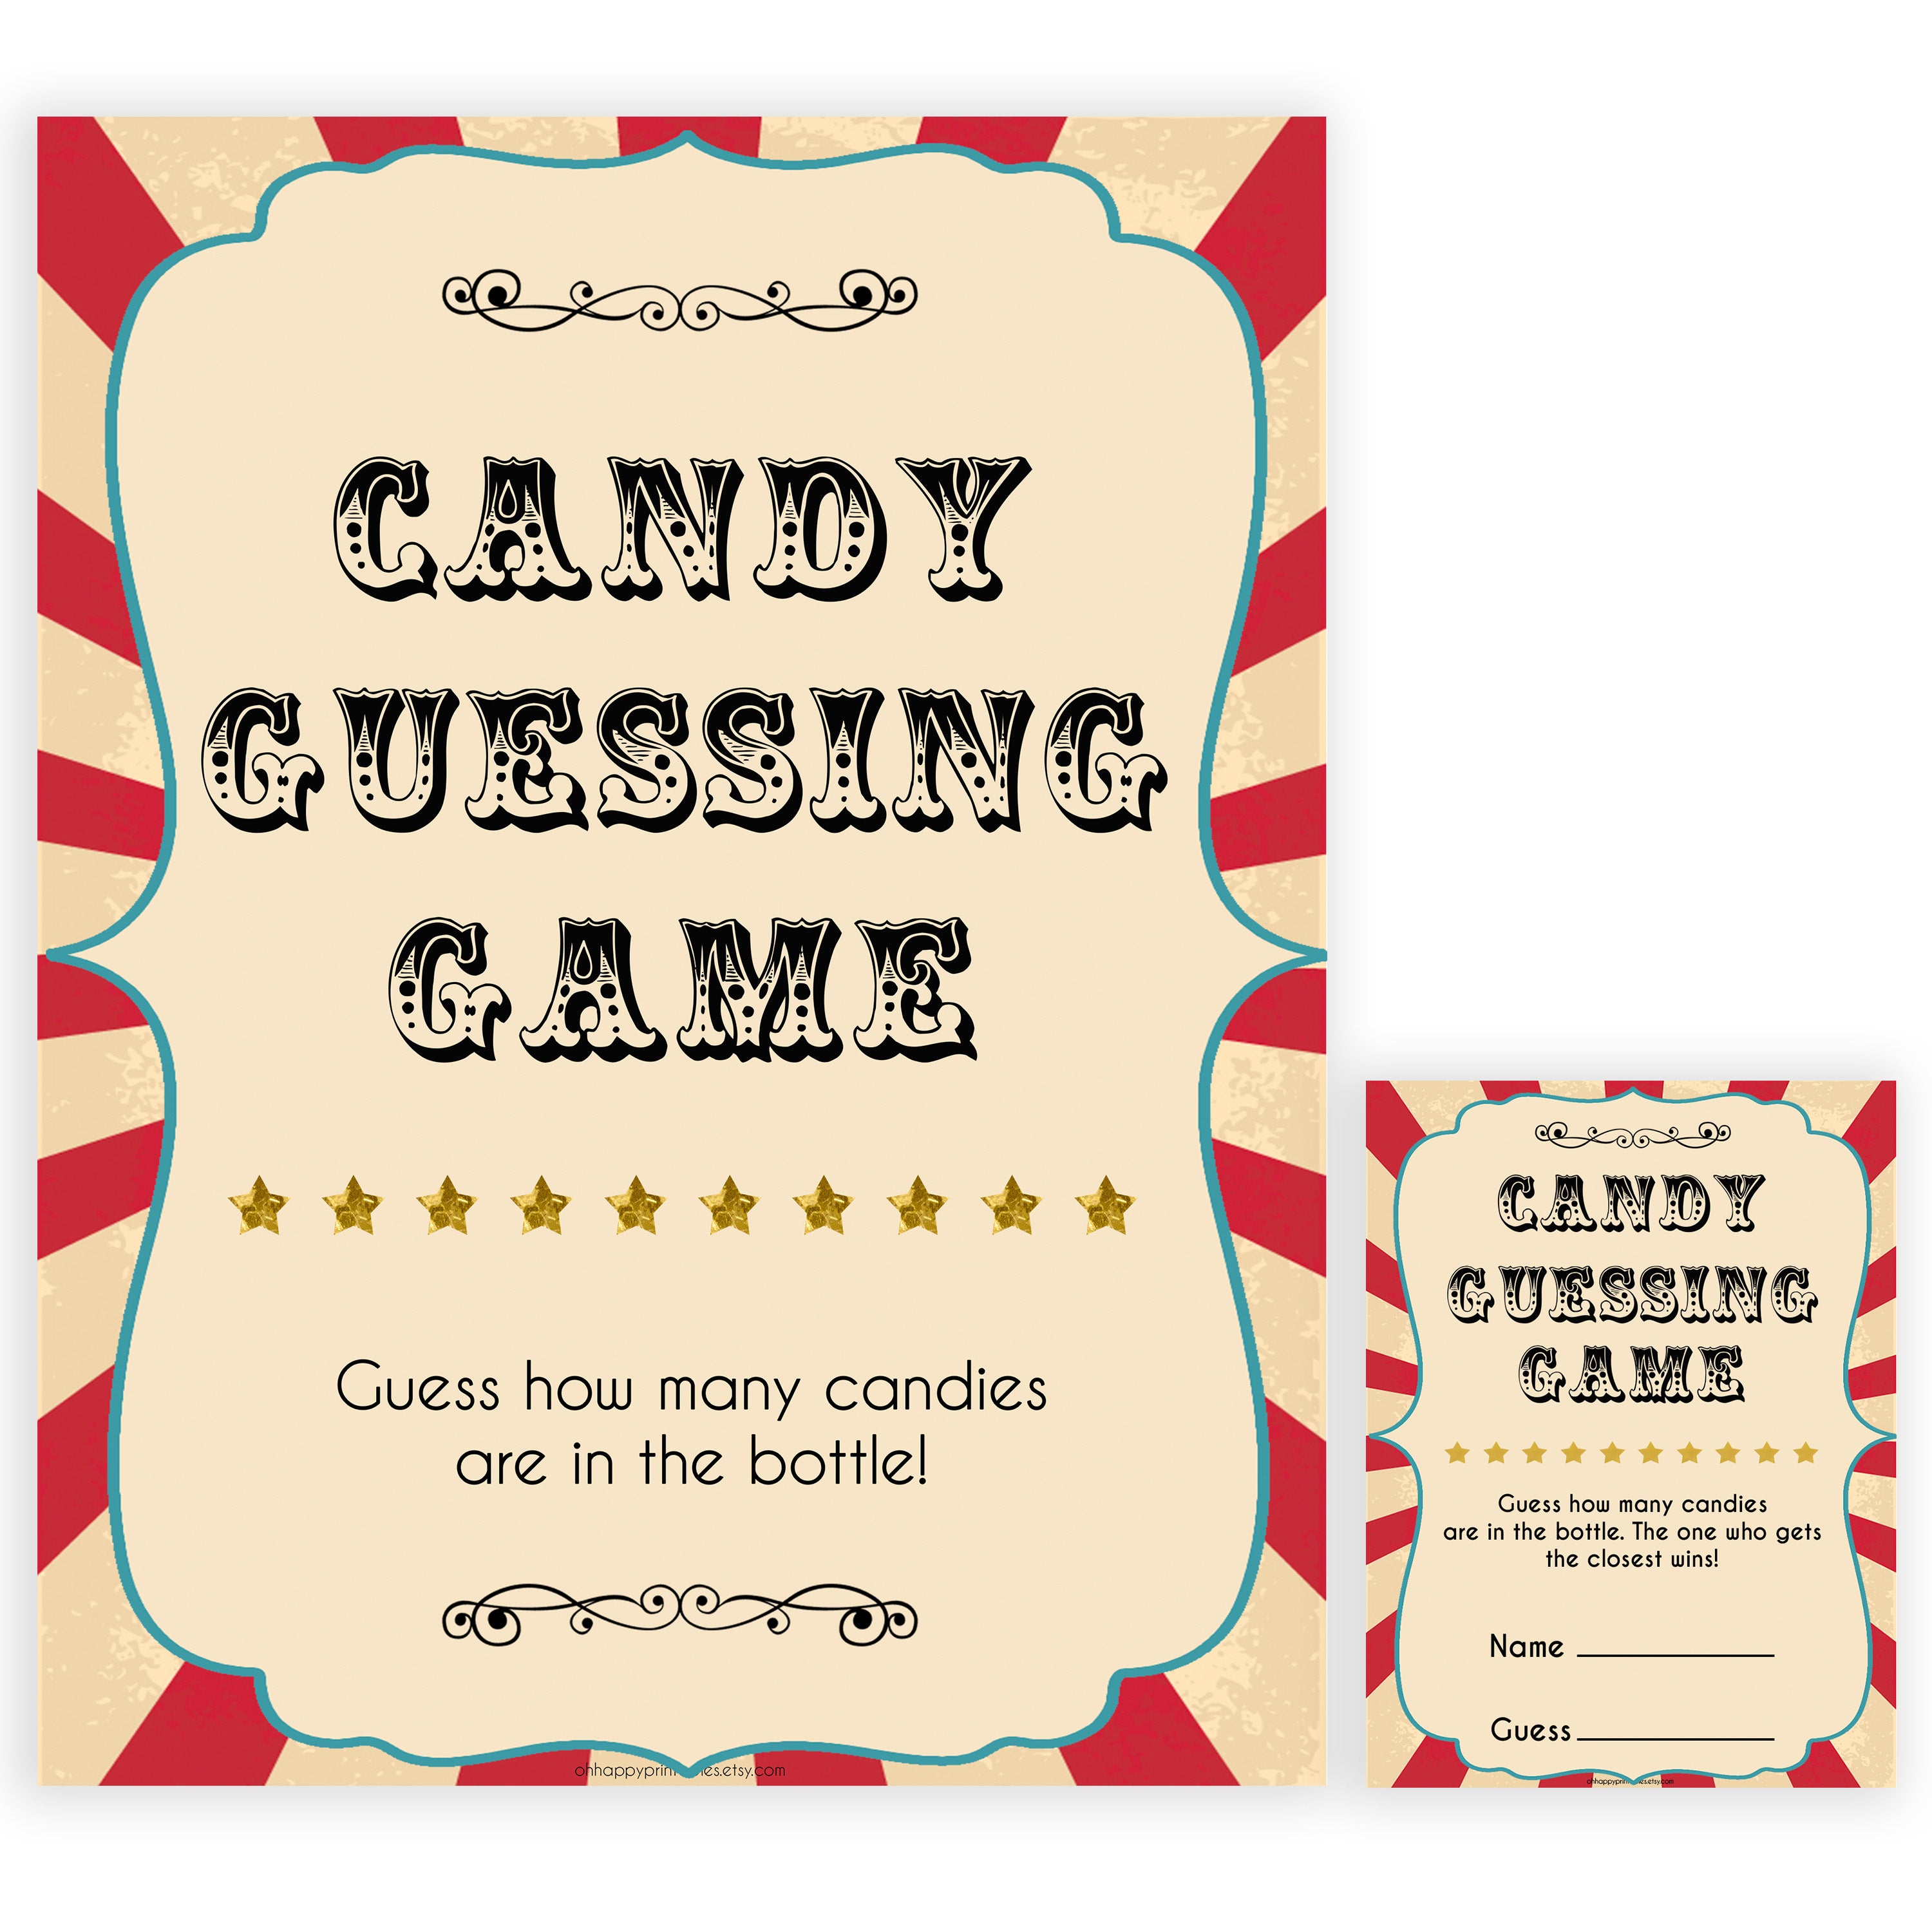 Circus candy guessing game baby shower games, circus baby games, carnival baby games, printable baby games, fun baby games, popular baby games, carnival baby shower, carnival theme